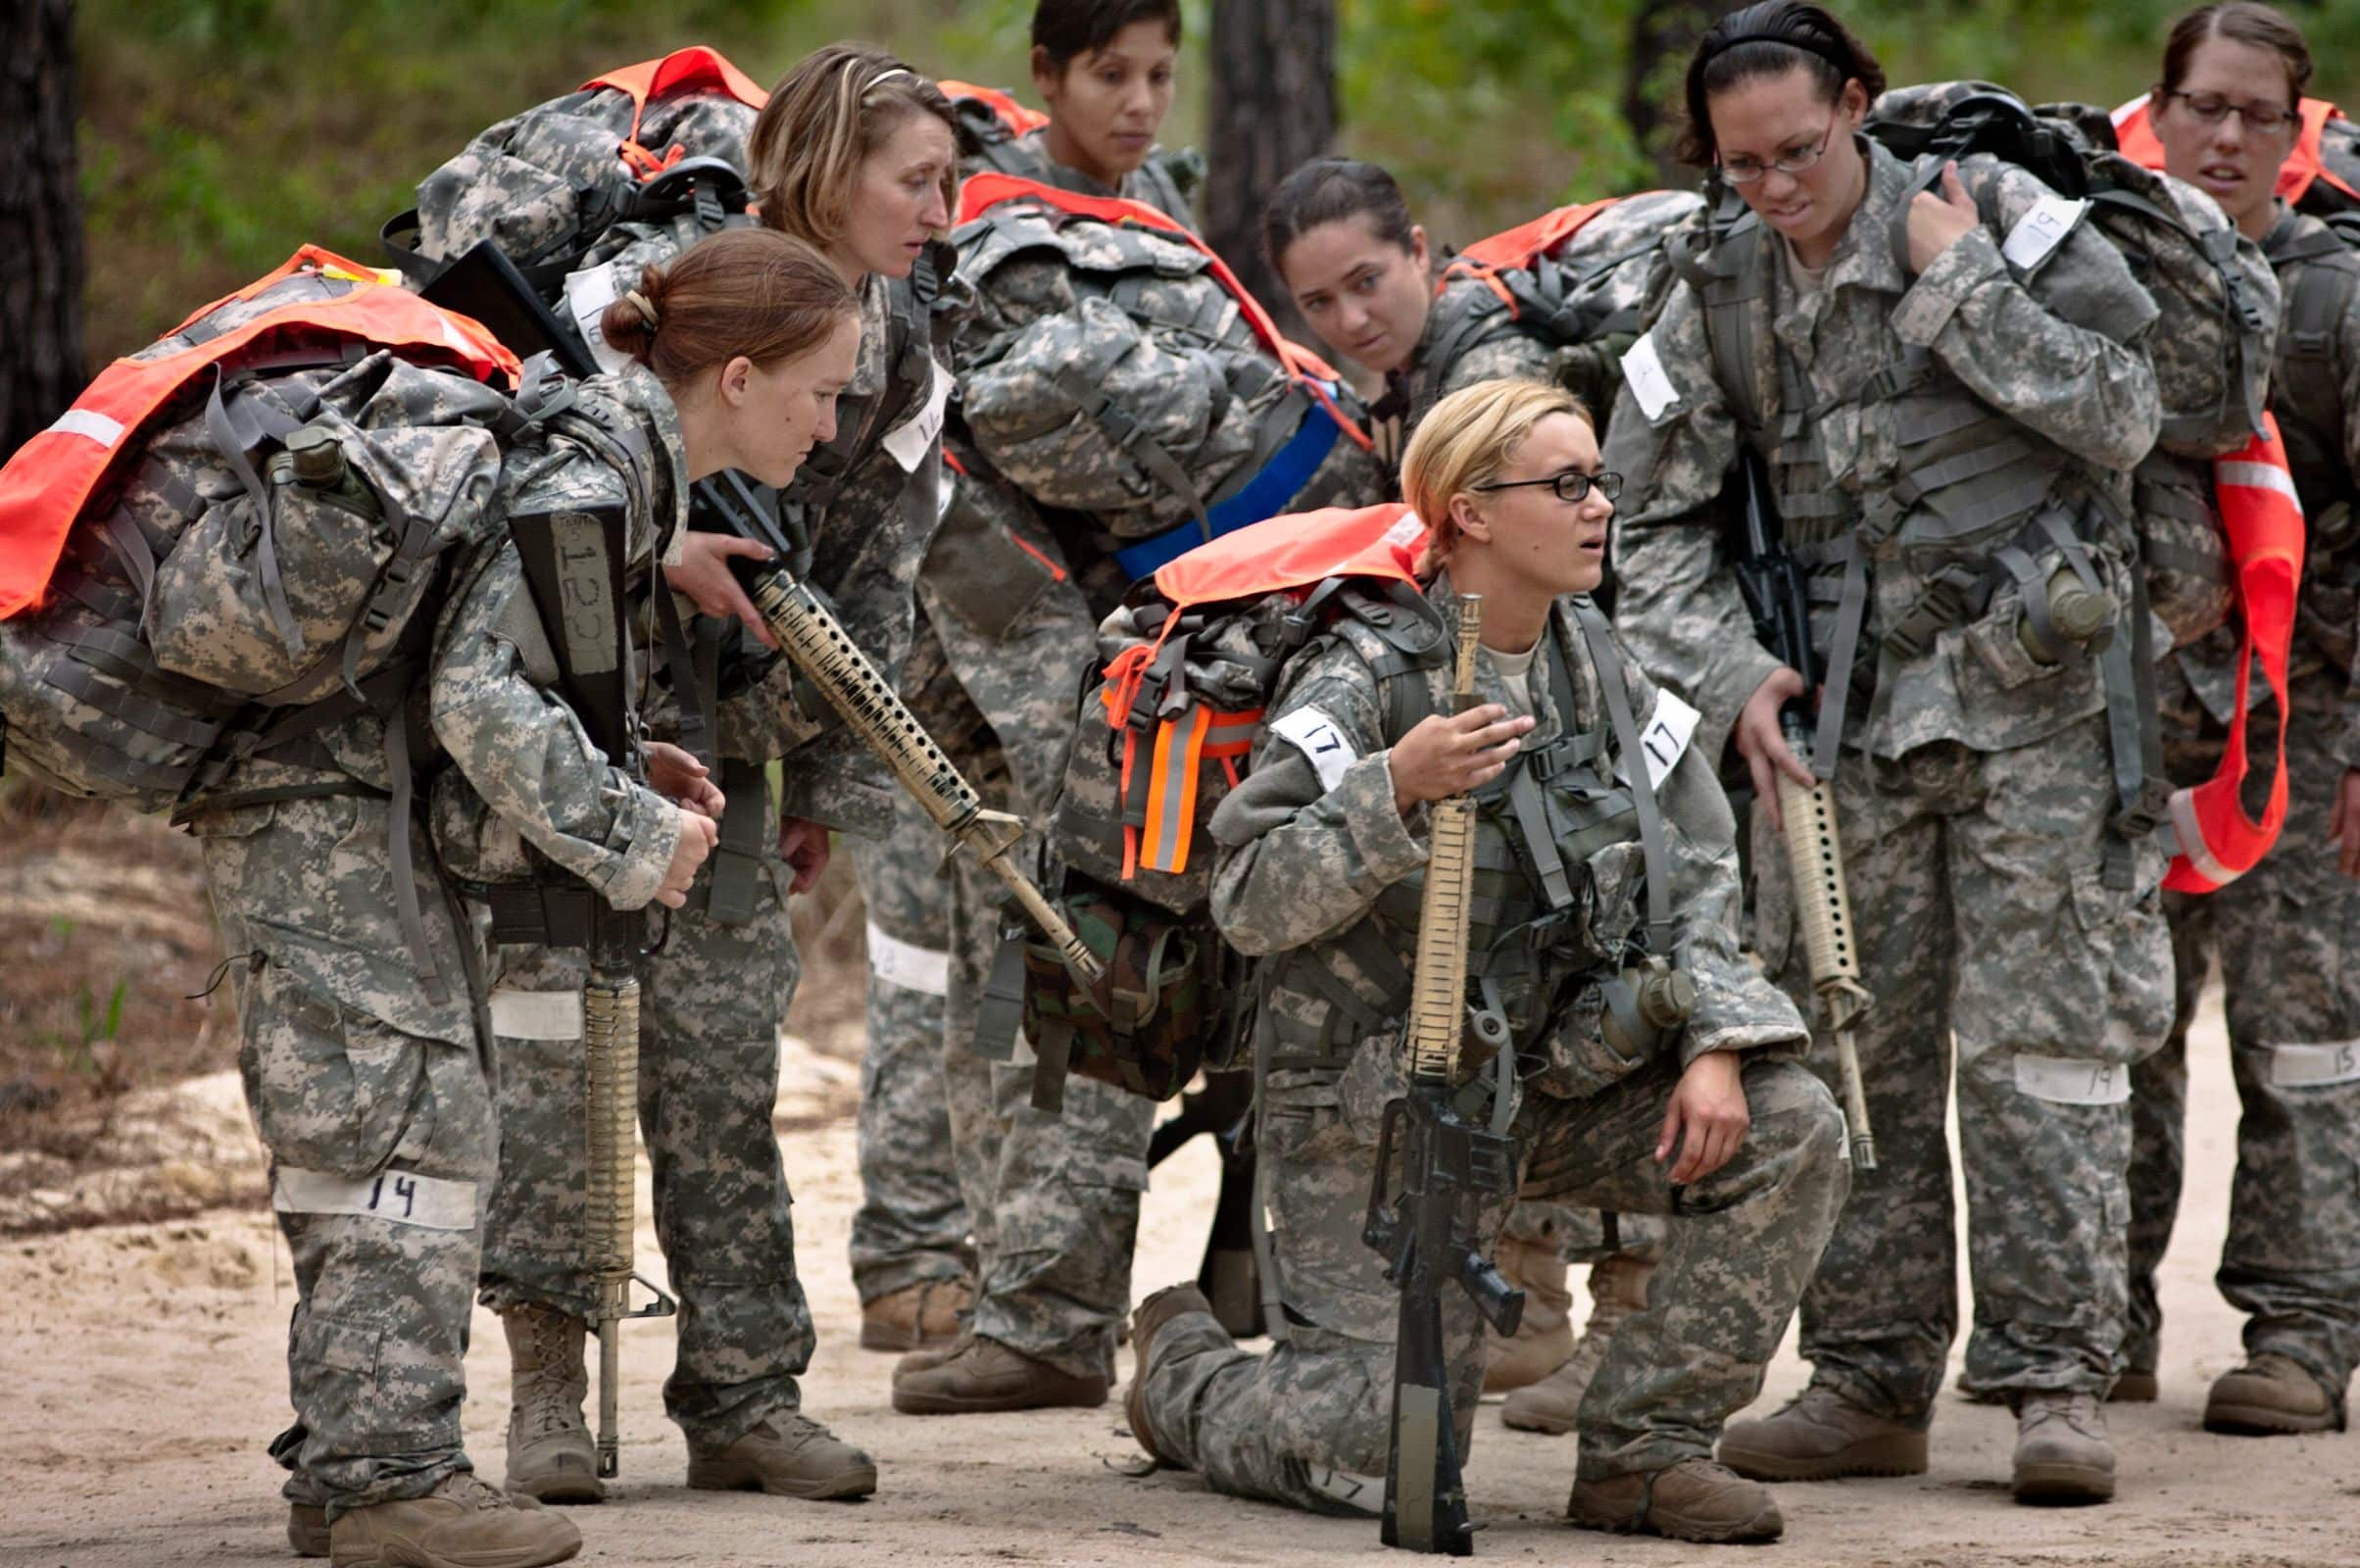 U.S. Army soldiers conduct a ruck march during the Cultural Support Assessment and Selection program. The U.S. Army Special Operations Command's cultural support program prepares all-female soldier teams to serve as enablers supporting Army special operations- combat forces